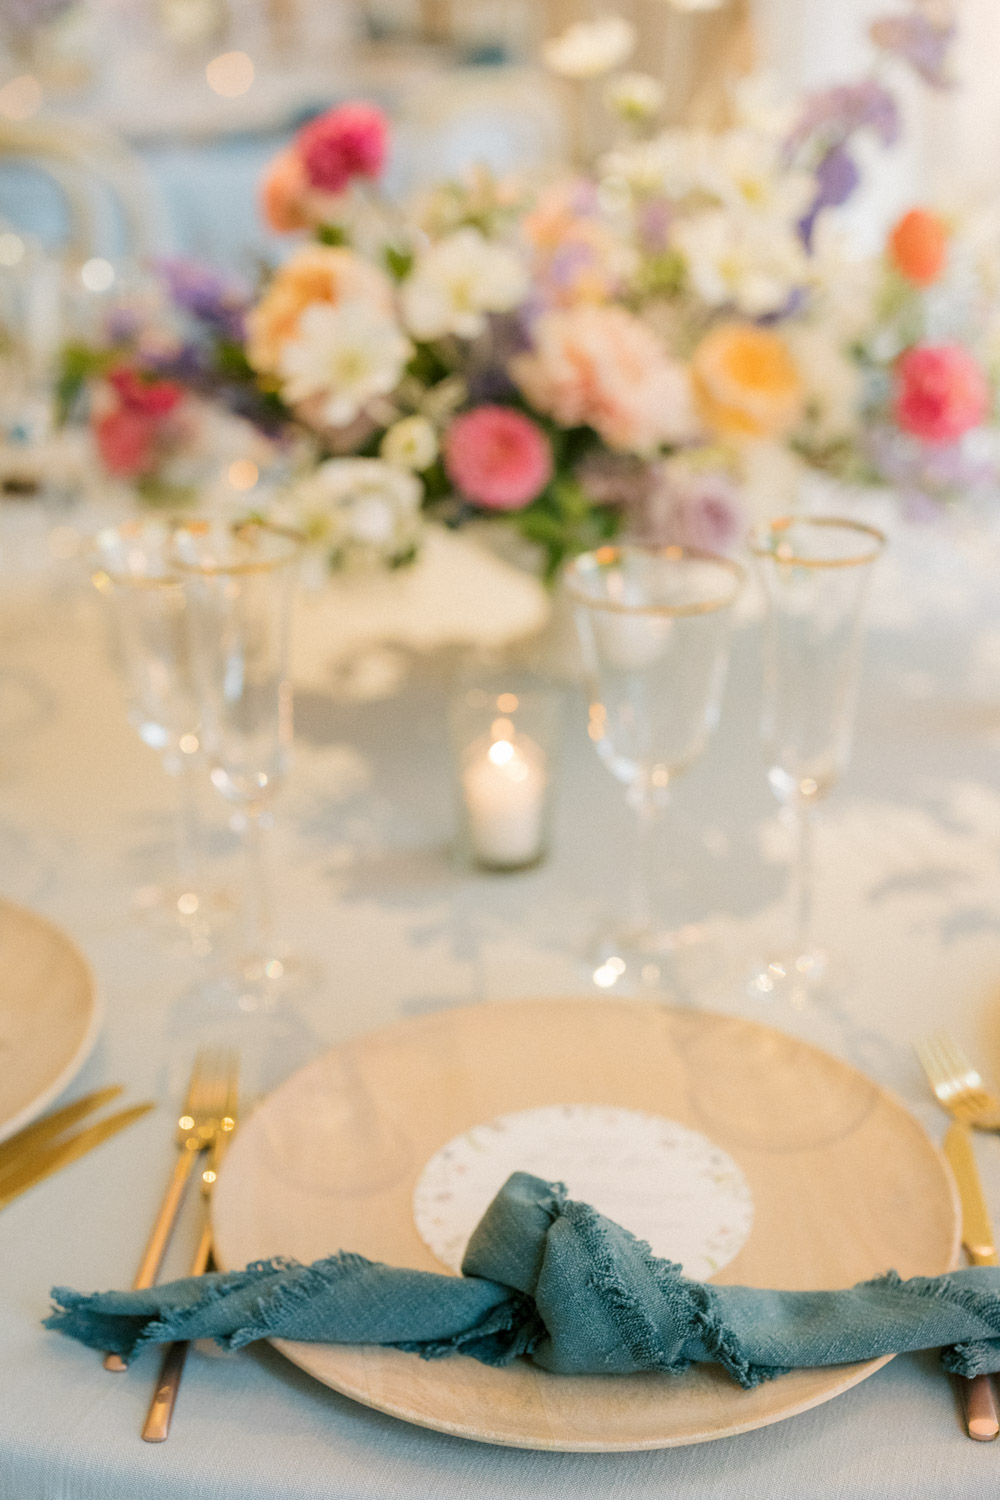 A bamboo charger and teal linen napkin for a colorful wedding reception.